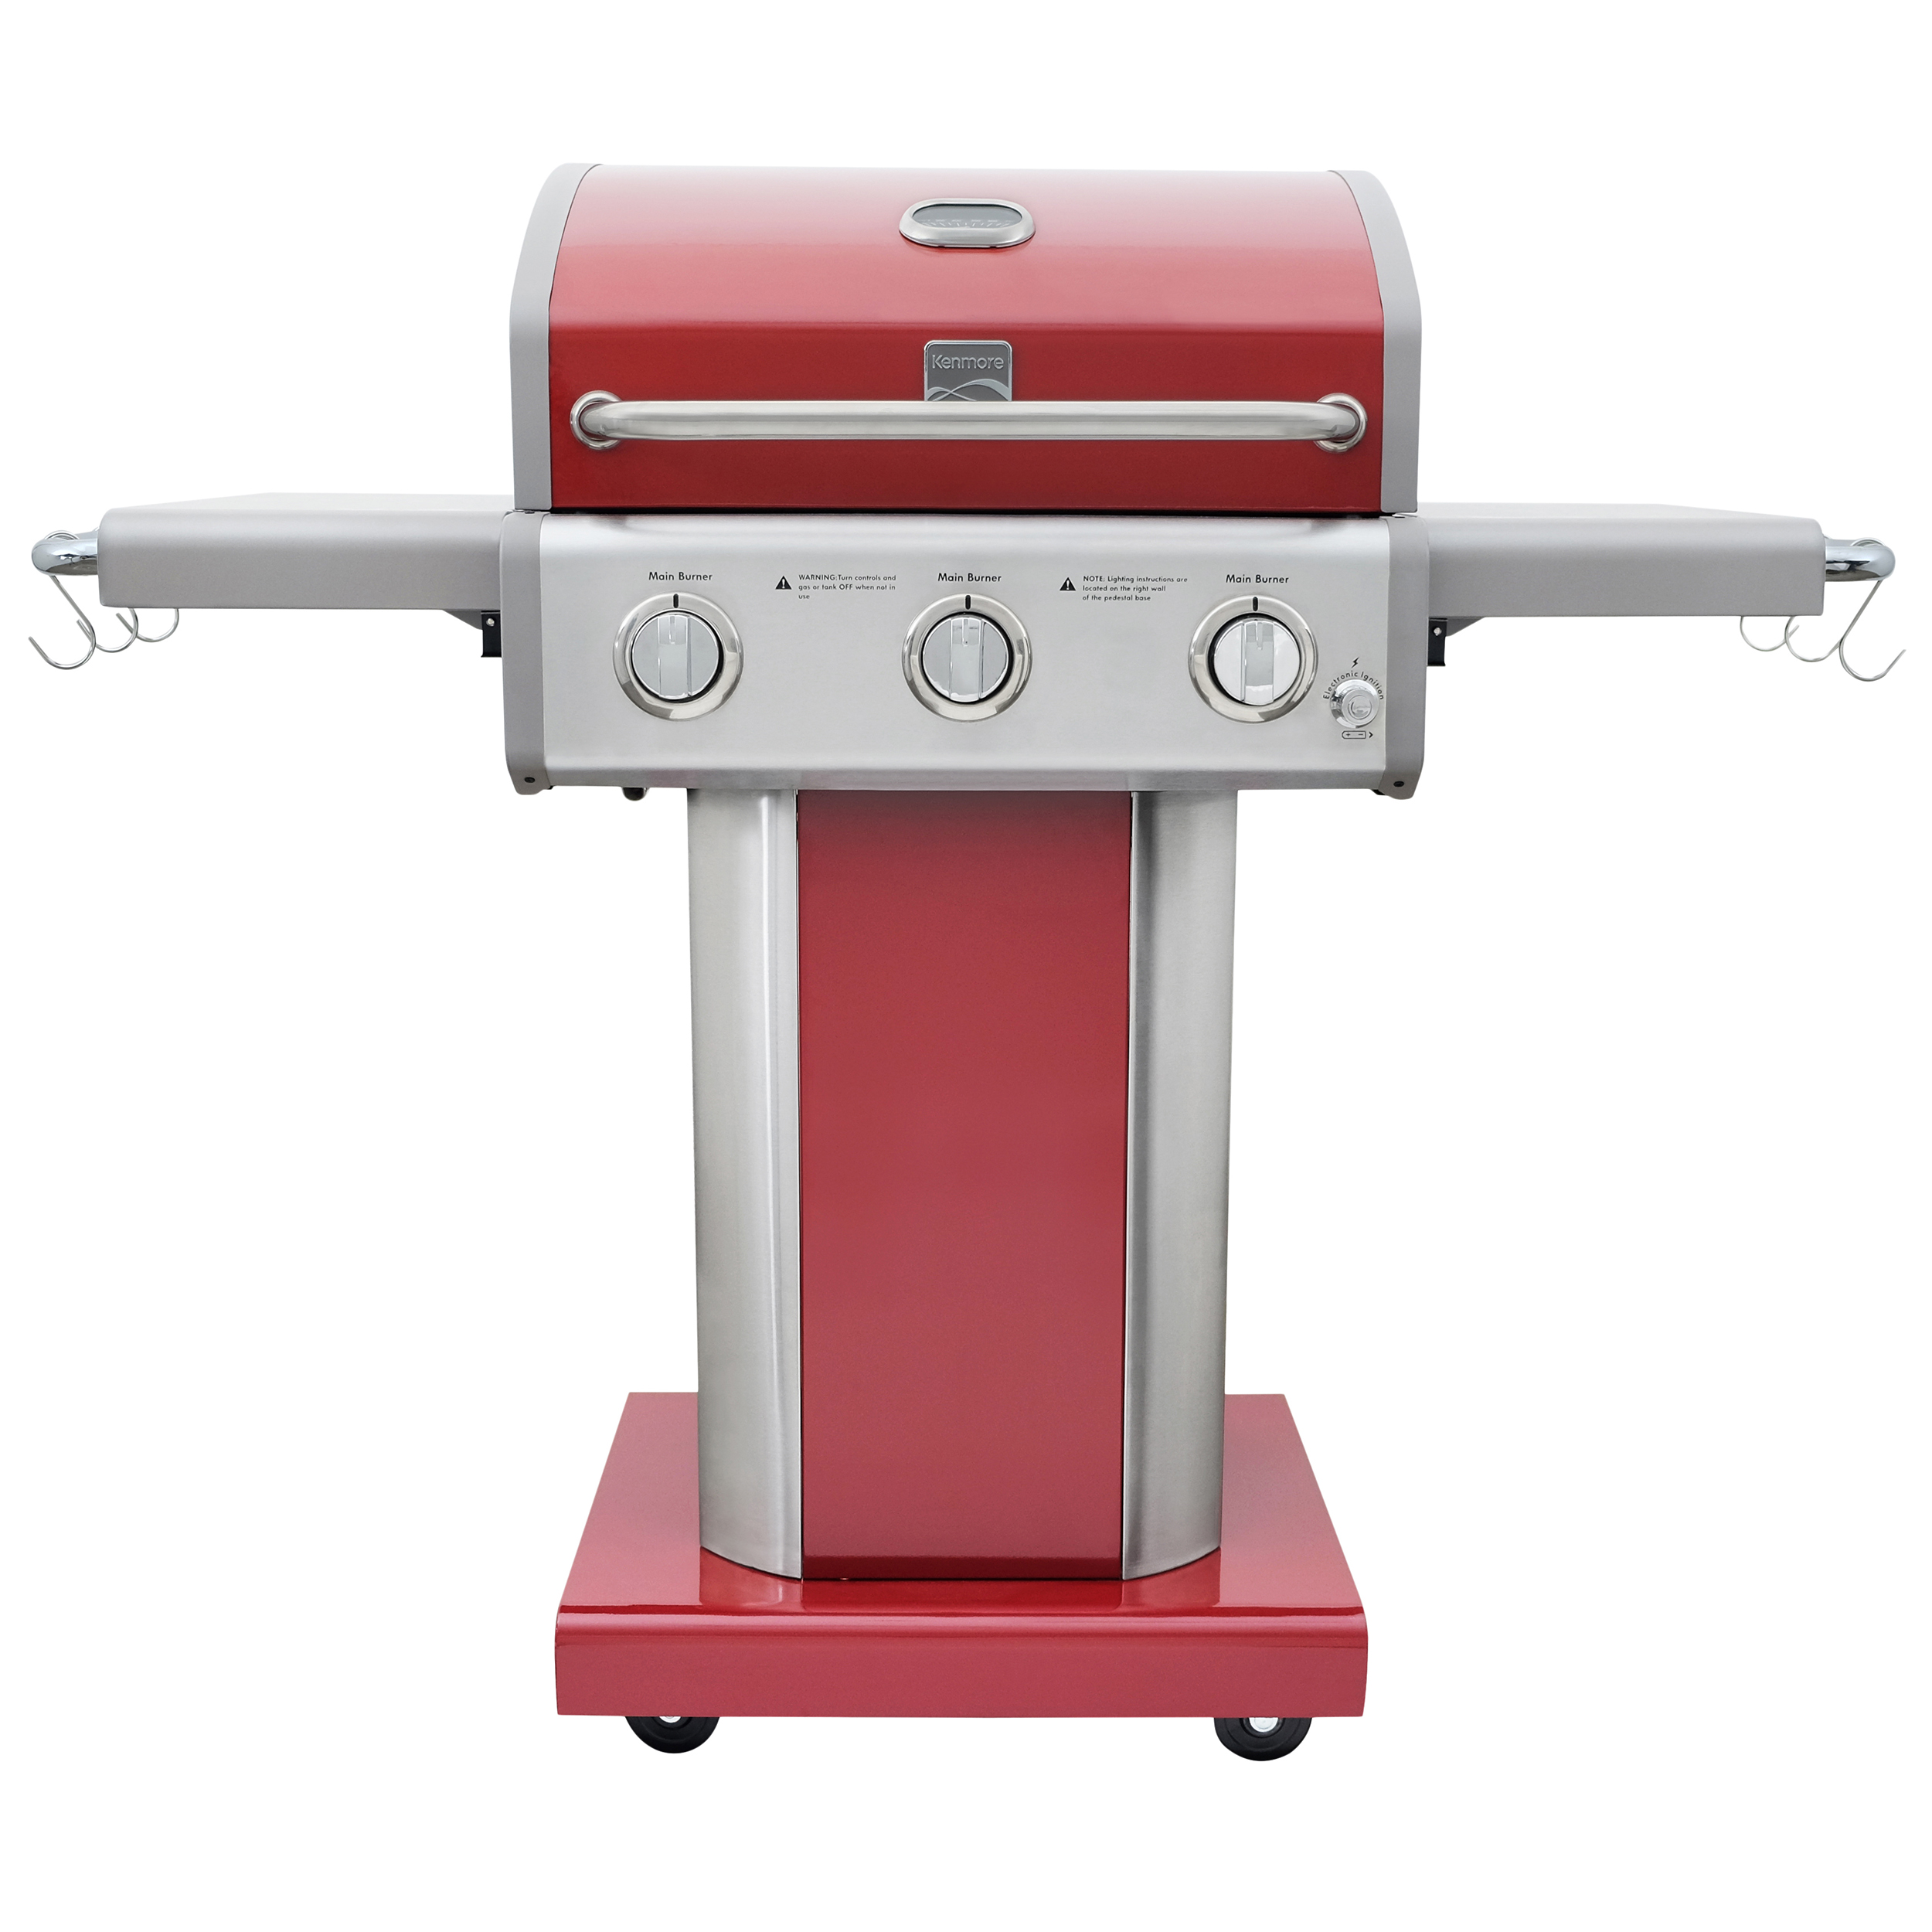 Kenmore 3-Burner Gas Grill, Outdoor BBQ Grill, Propane Grill with Foldable Side Tables, Red - image 1 of 12